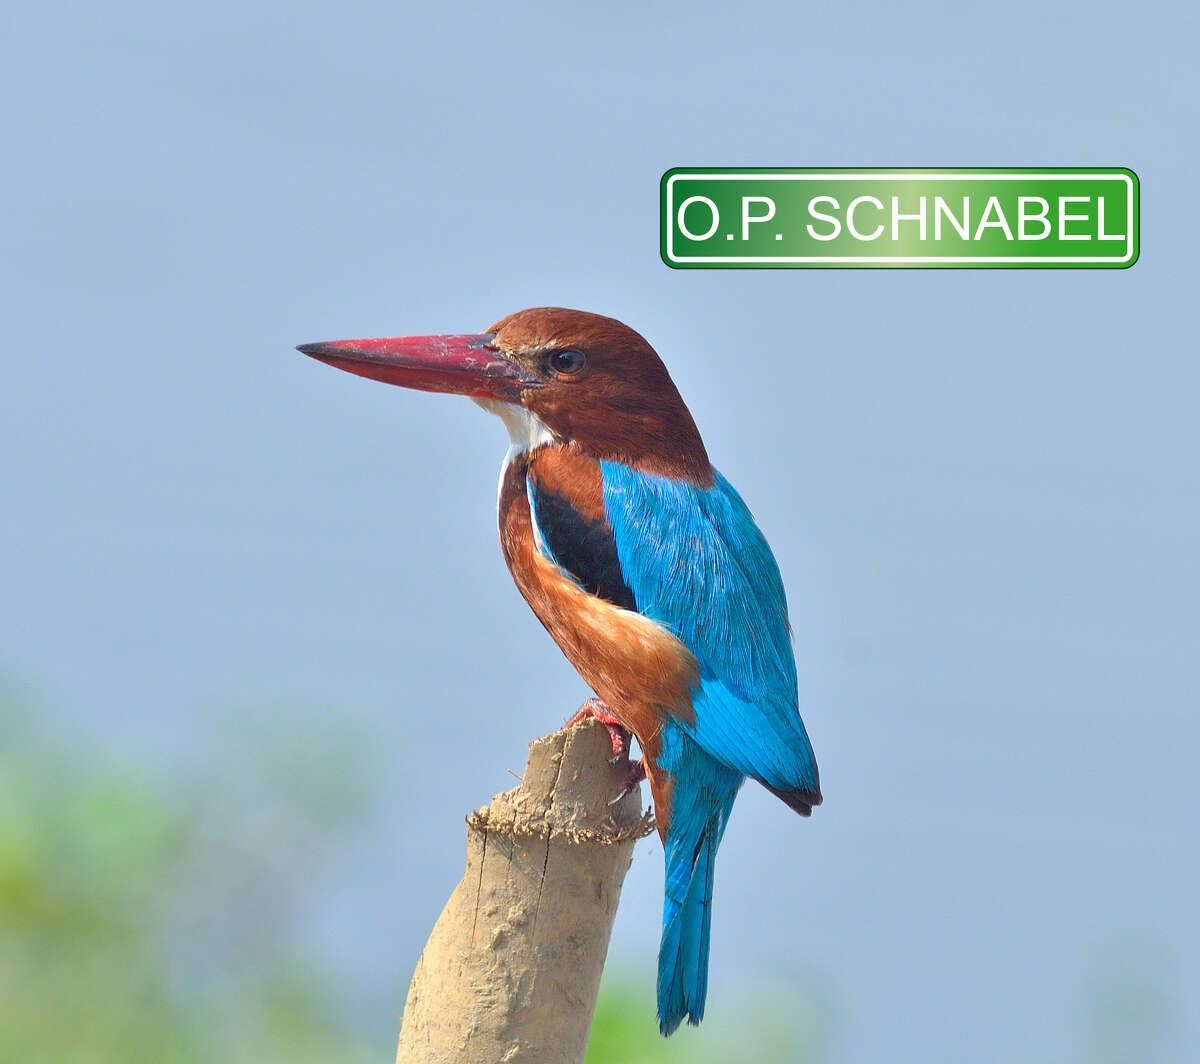 O.P. Schnabel Park is rooted in a German surname, meaning "beak."